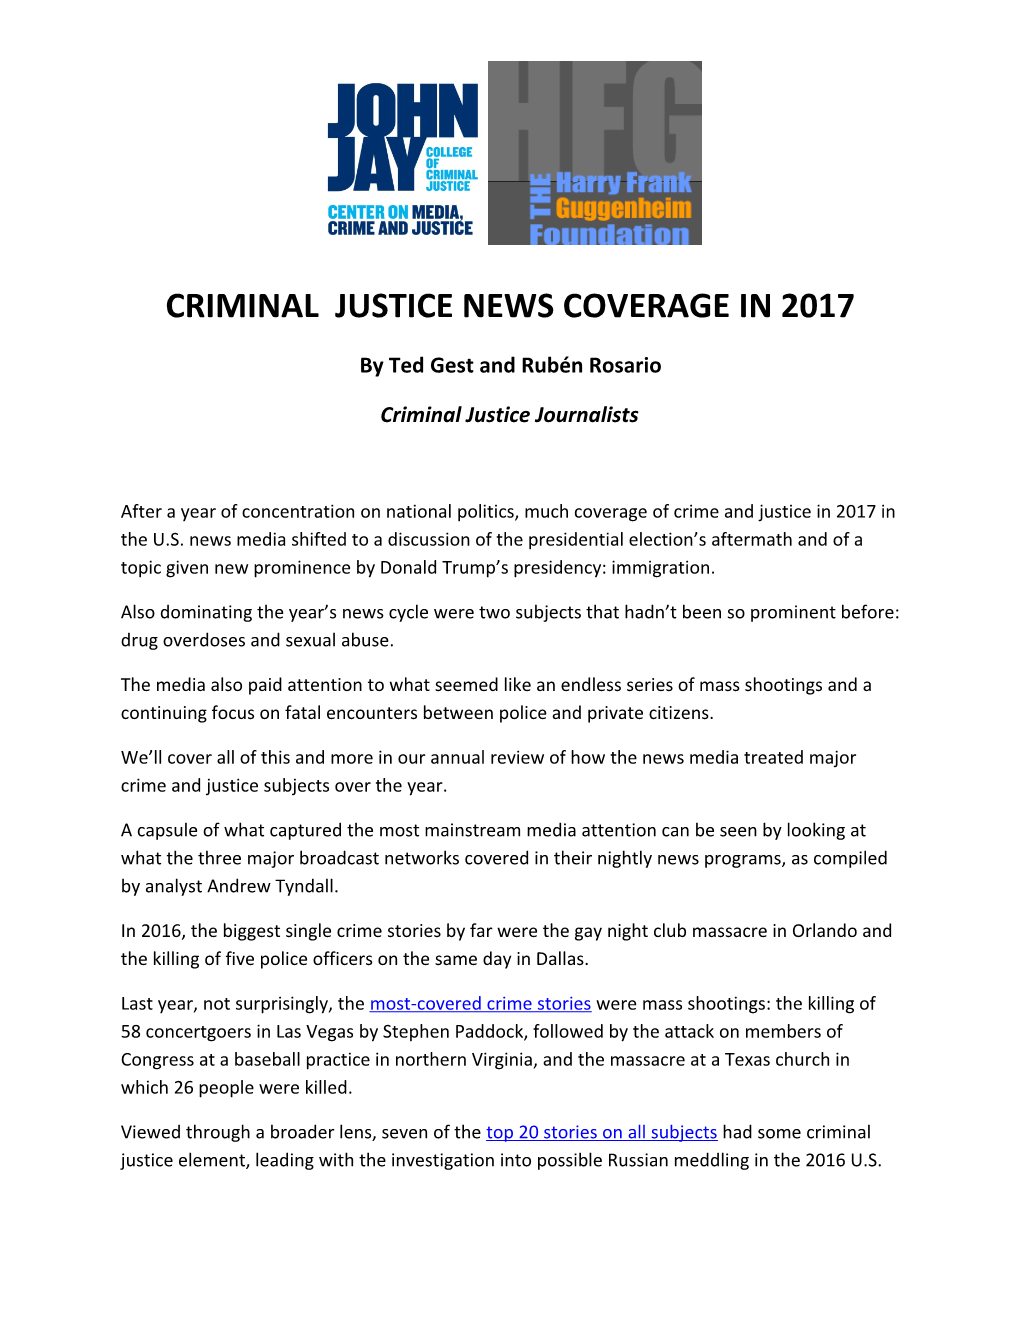 Criminal Justice News Coverage in 2017